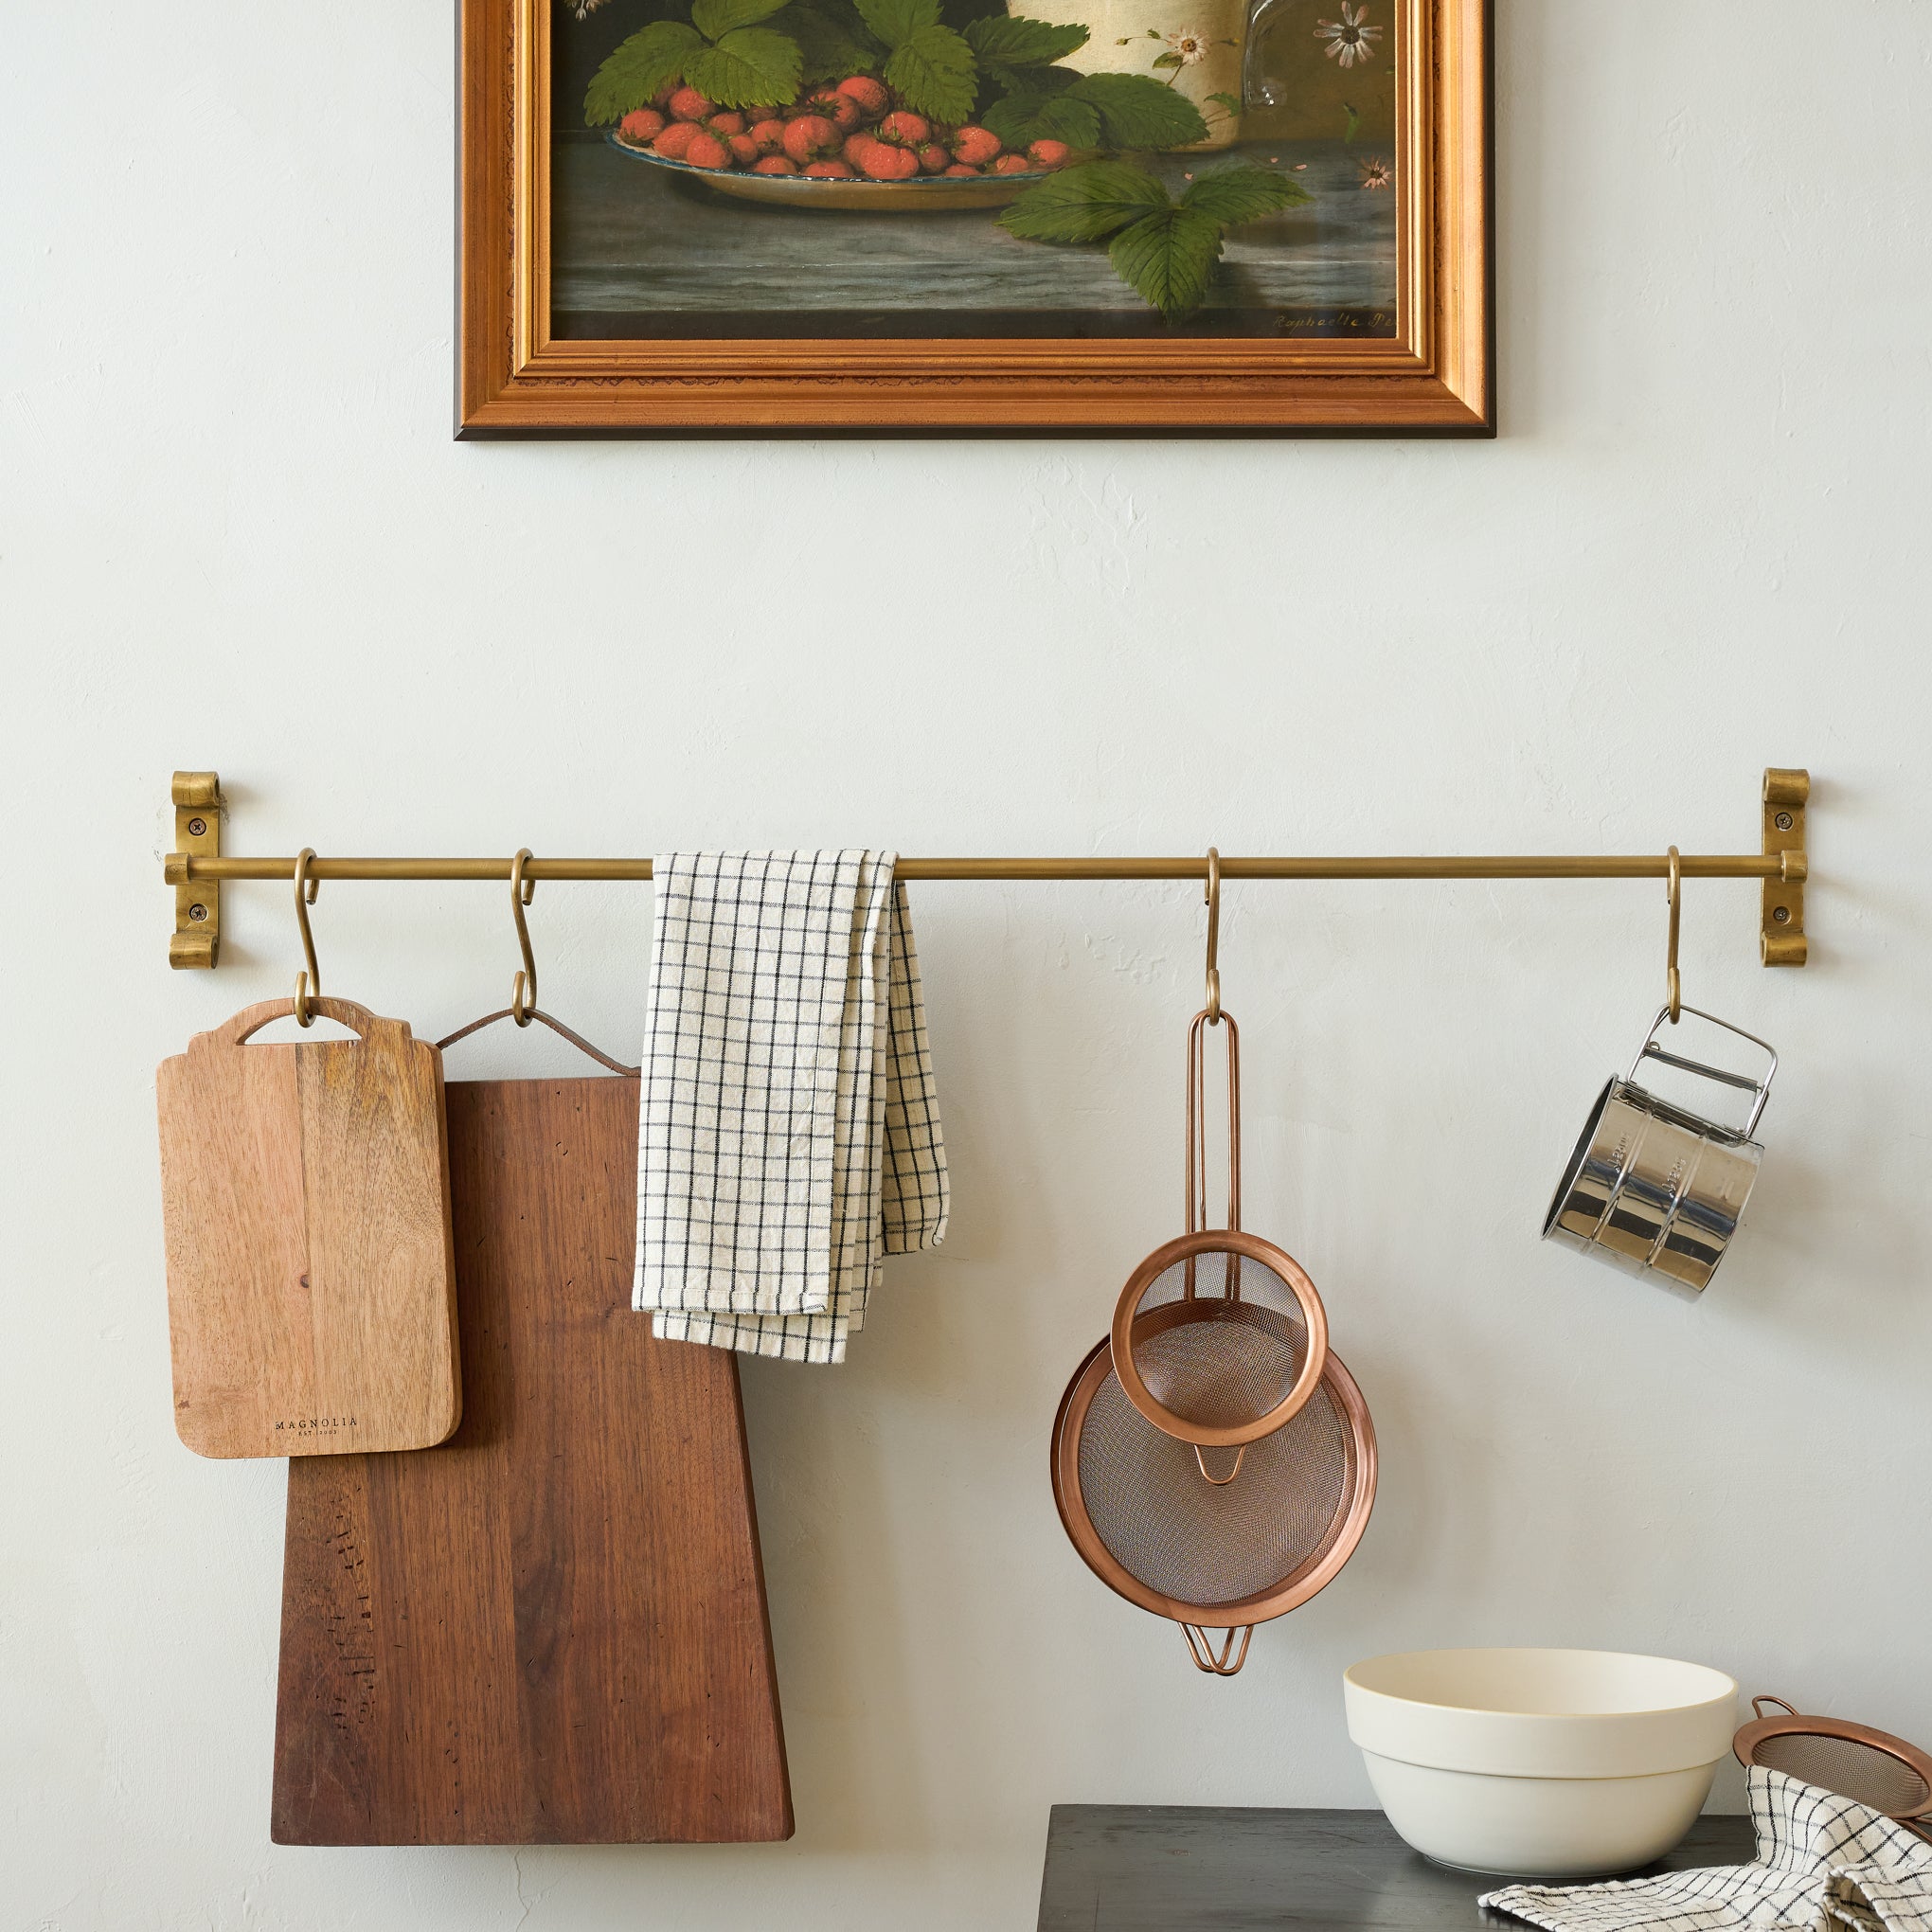 Duke Brass Rail with Hooks with kitchen items hanging on hooks